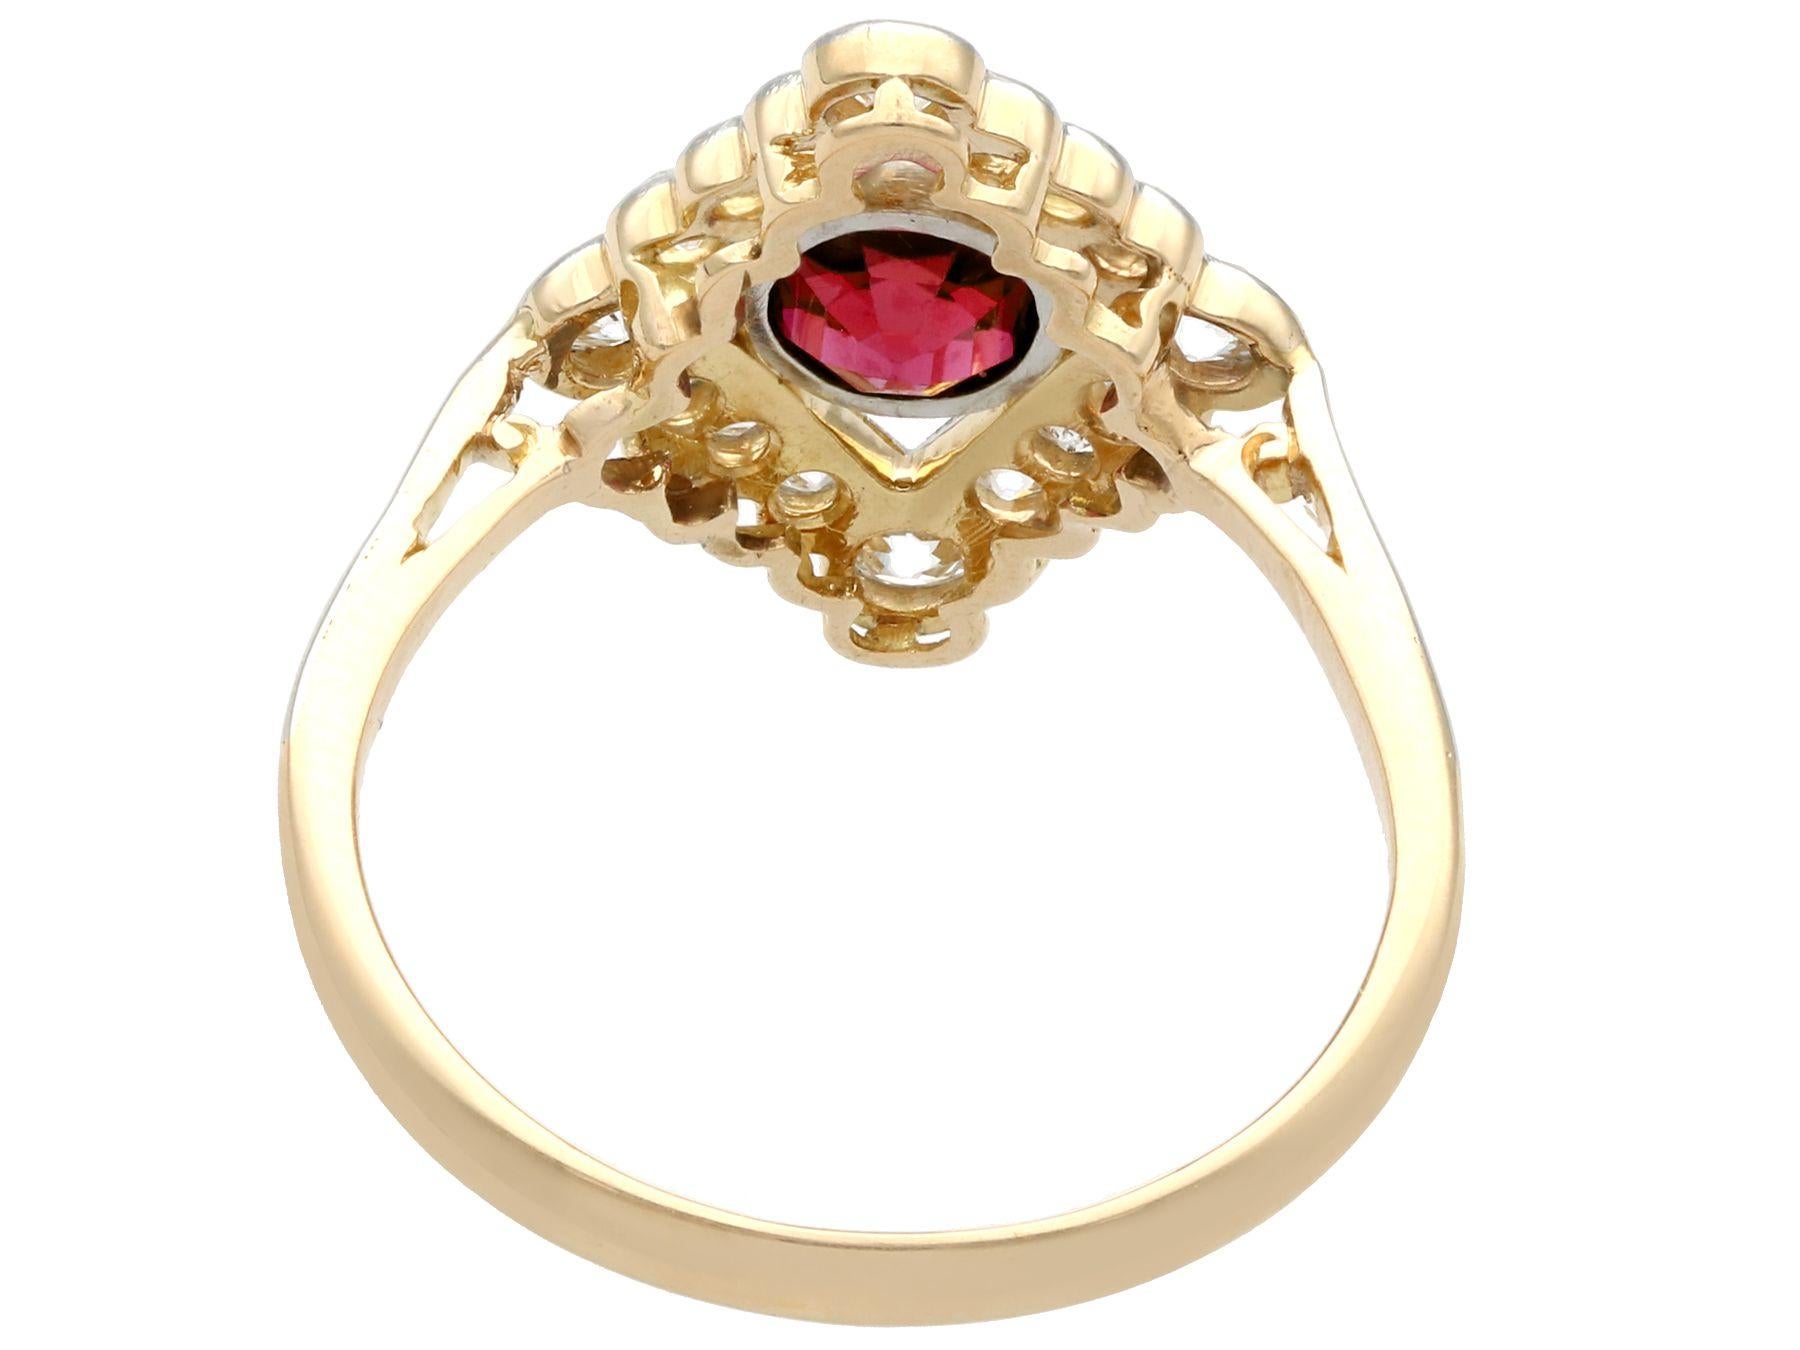 Women's or Men's 1.20 Carat Siam Ruby and 1.09 Carat Diamond Yellow Gold Ring Antique, 1920s